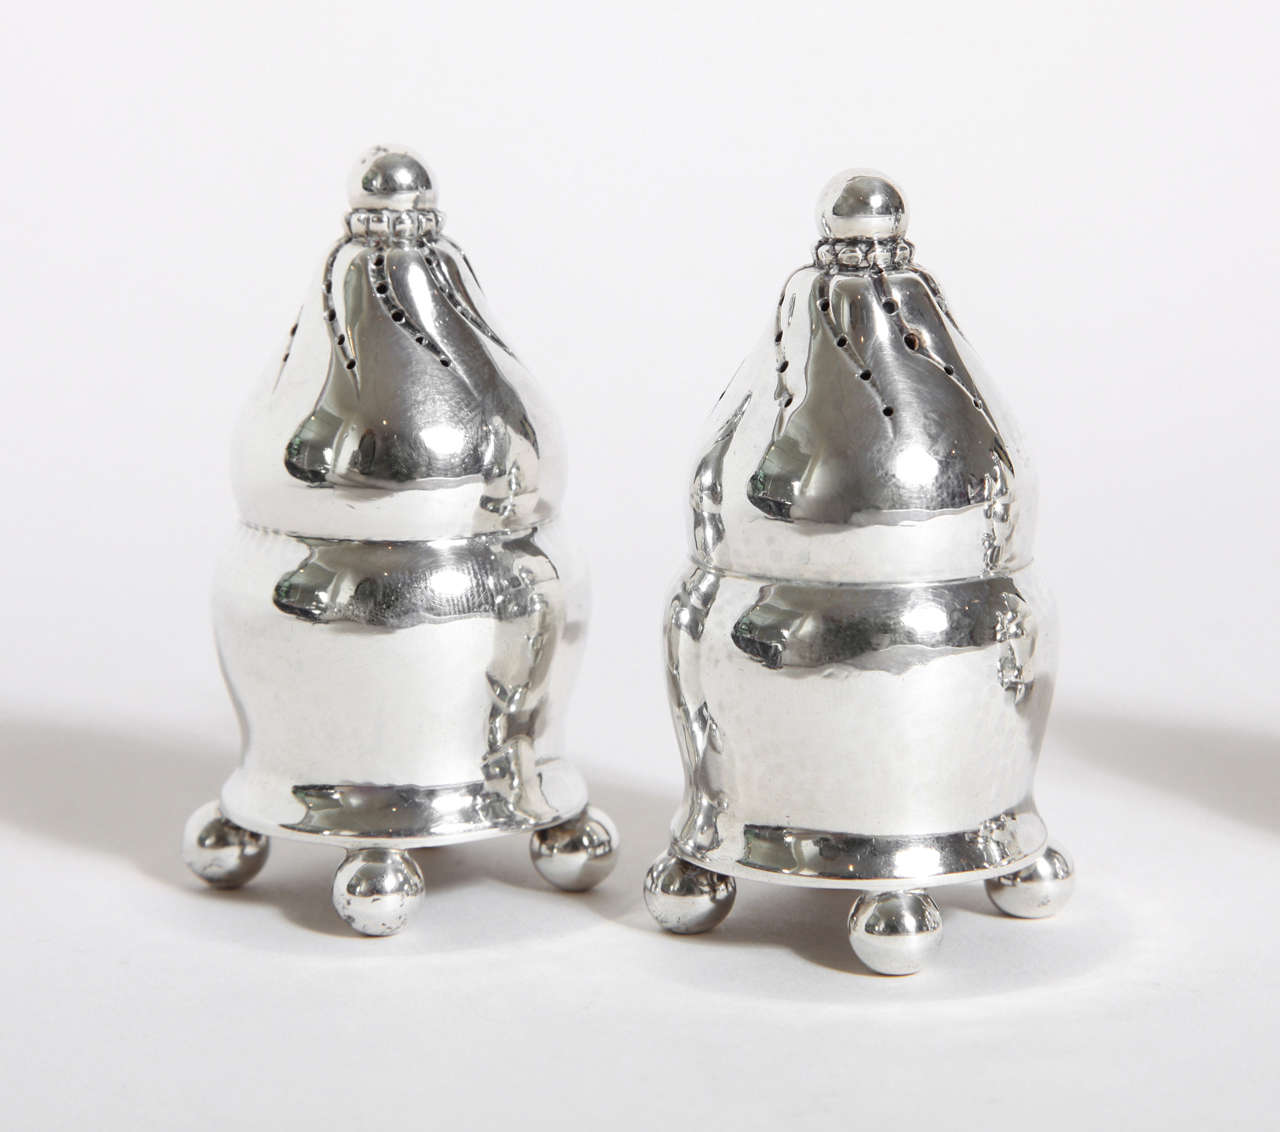 Georg Jensen Danish Set of Four Sterling Silver Casters #410 For Sale 5